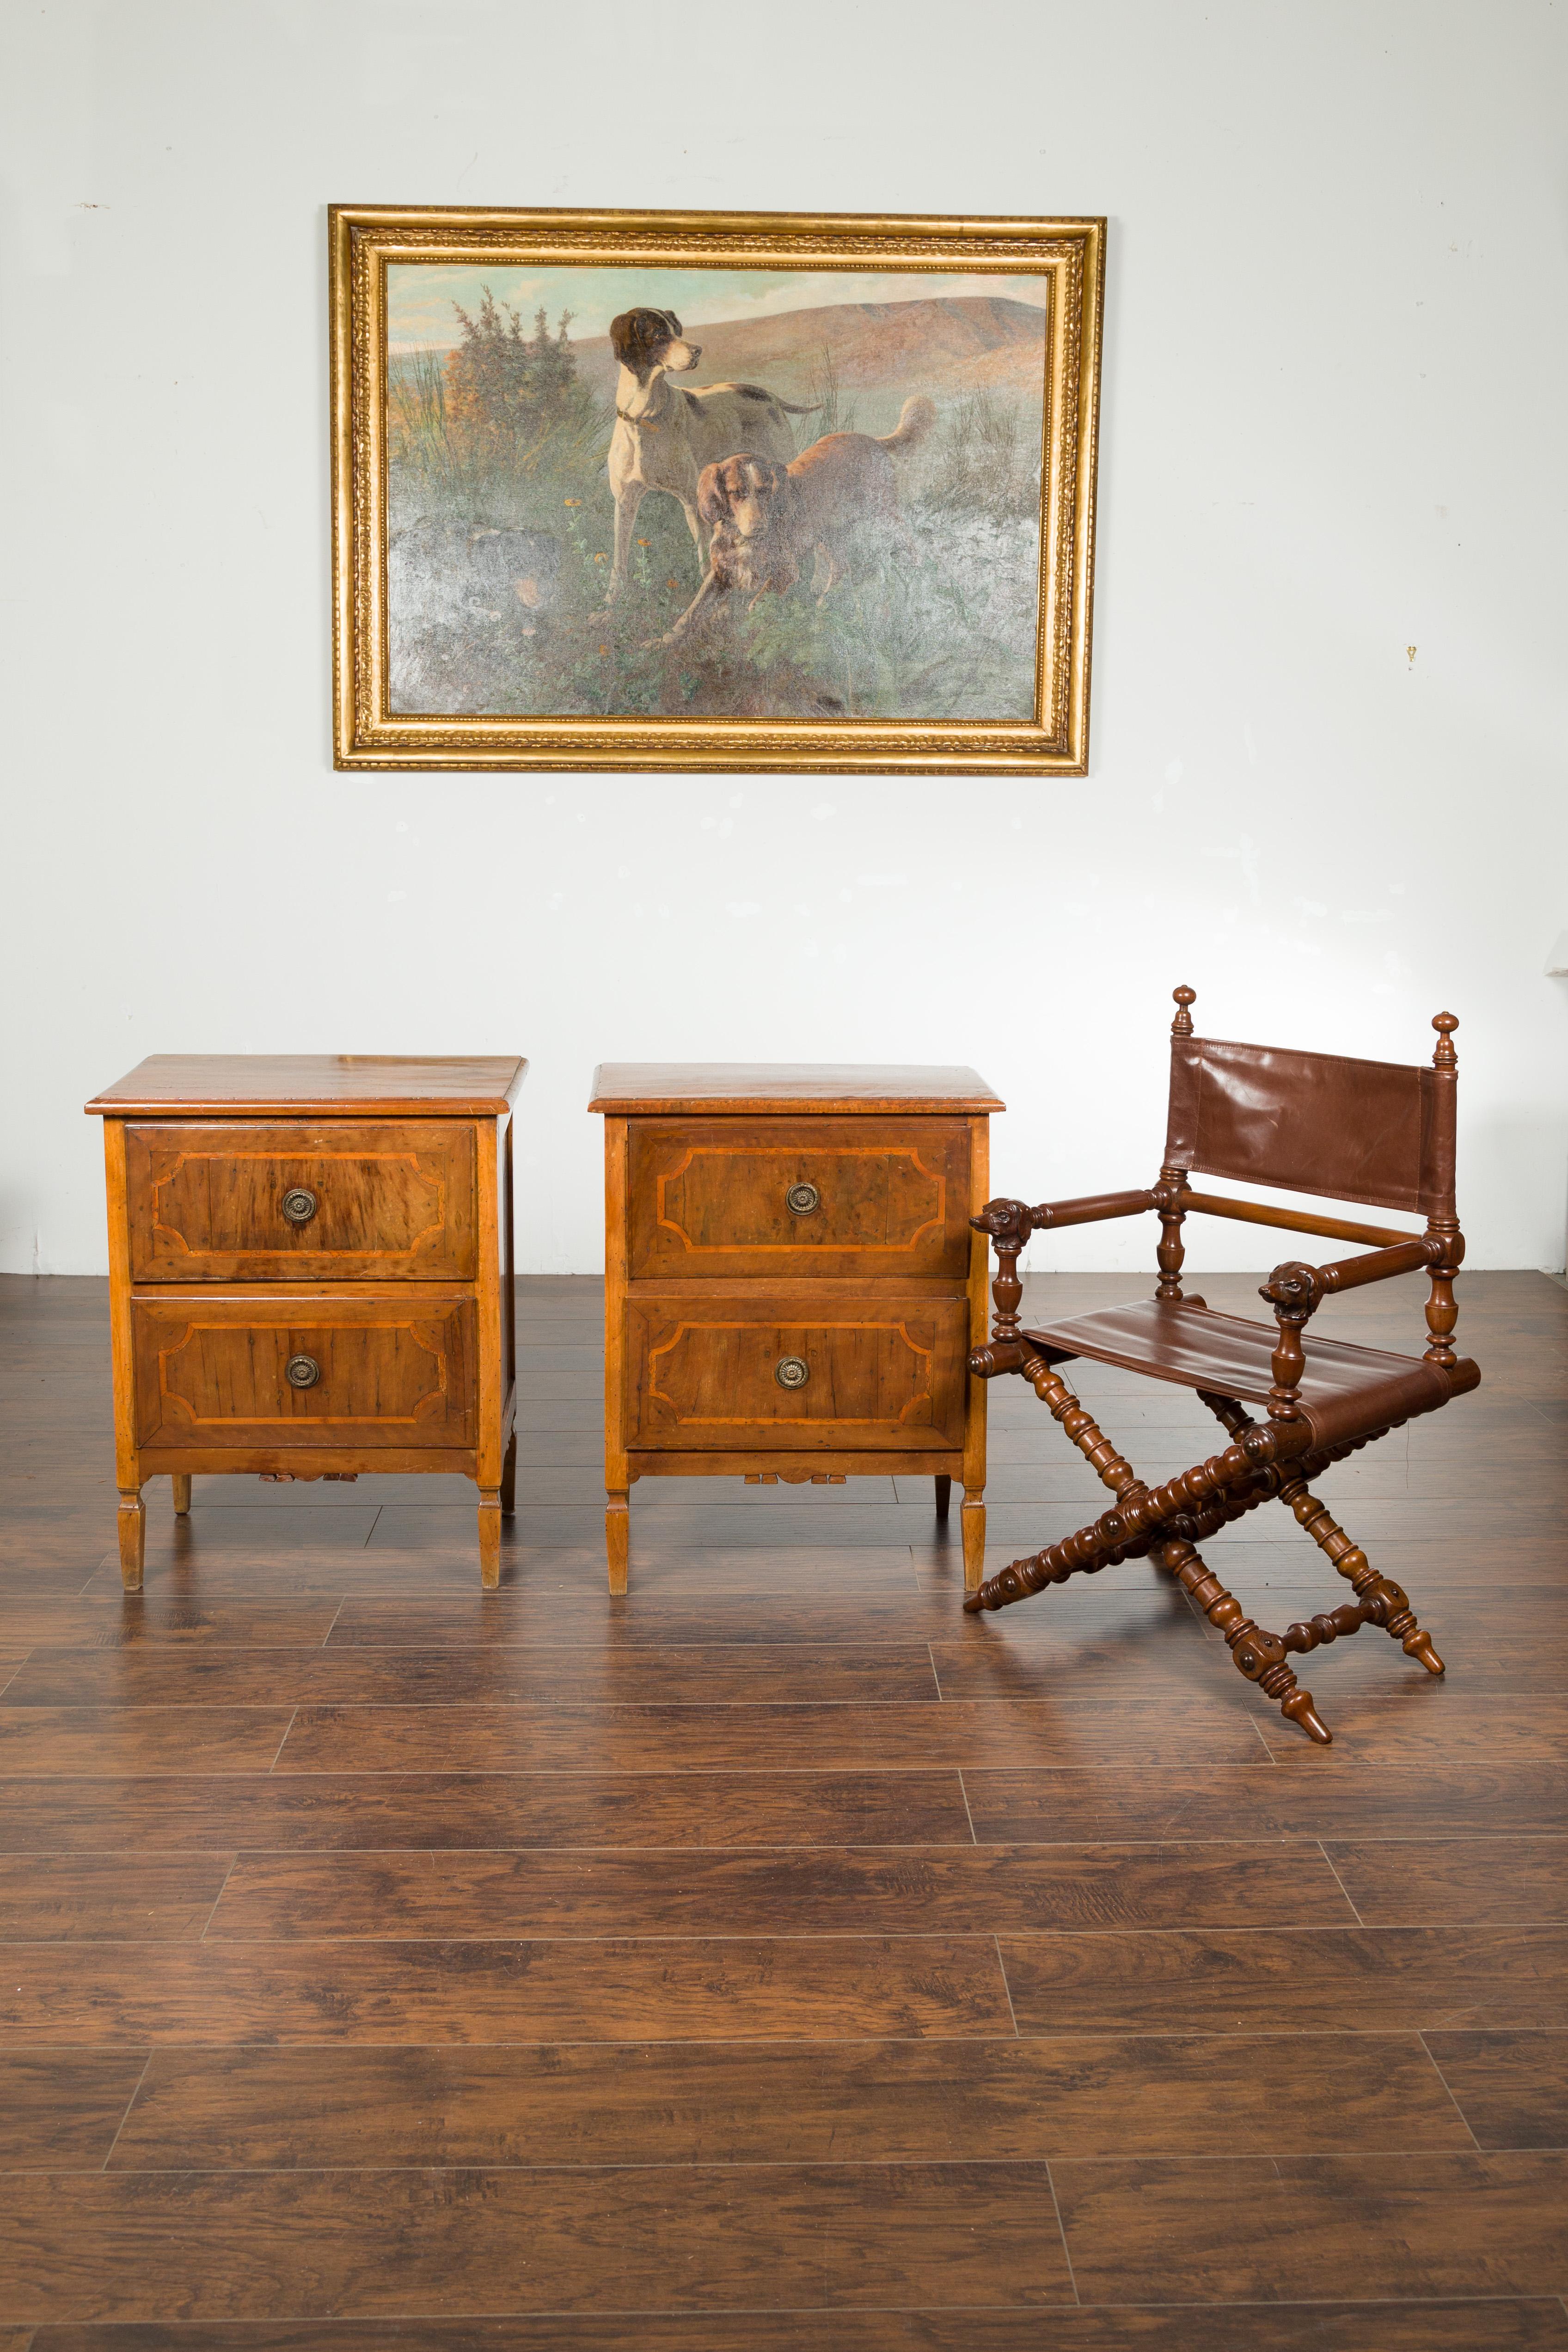 A pair of petite Italian walnut two-drawer chests with banding, carved aprons and tapered feet. Created in Italy during the first quarter of the 19th century, each of this pair of chests features a rectangular top sitting above two drawers, adorned